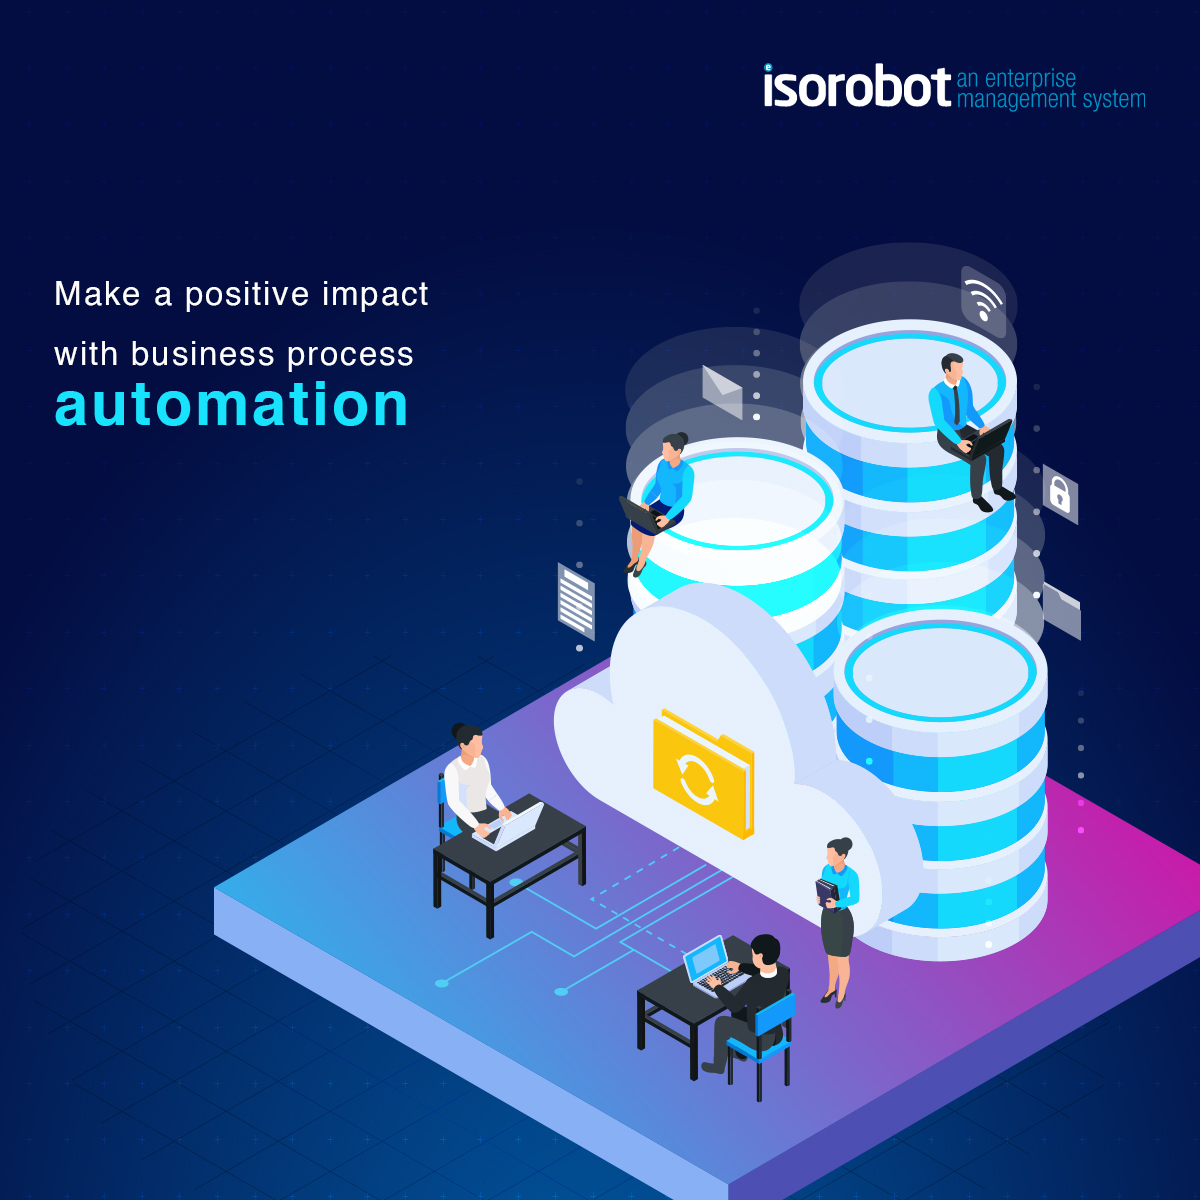 Helping business owners all over the world understand the power of automated business processes and the freedom they can bring.

#powerofautomation